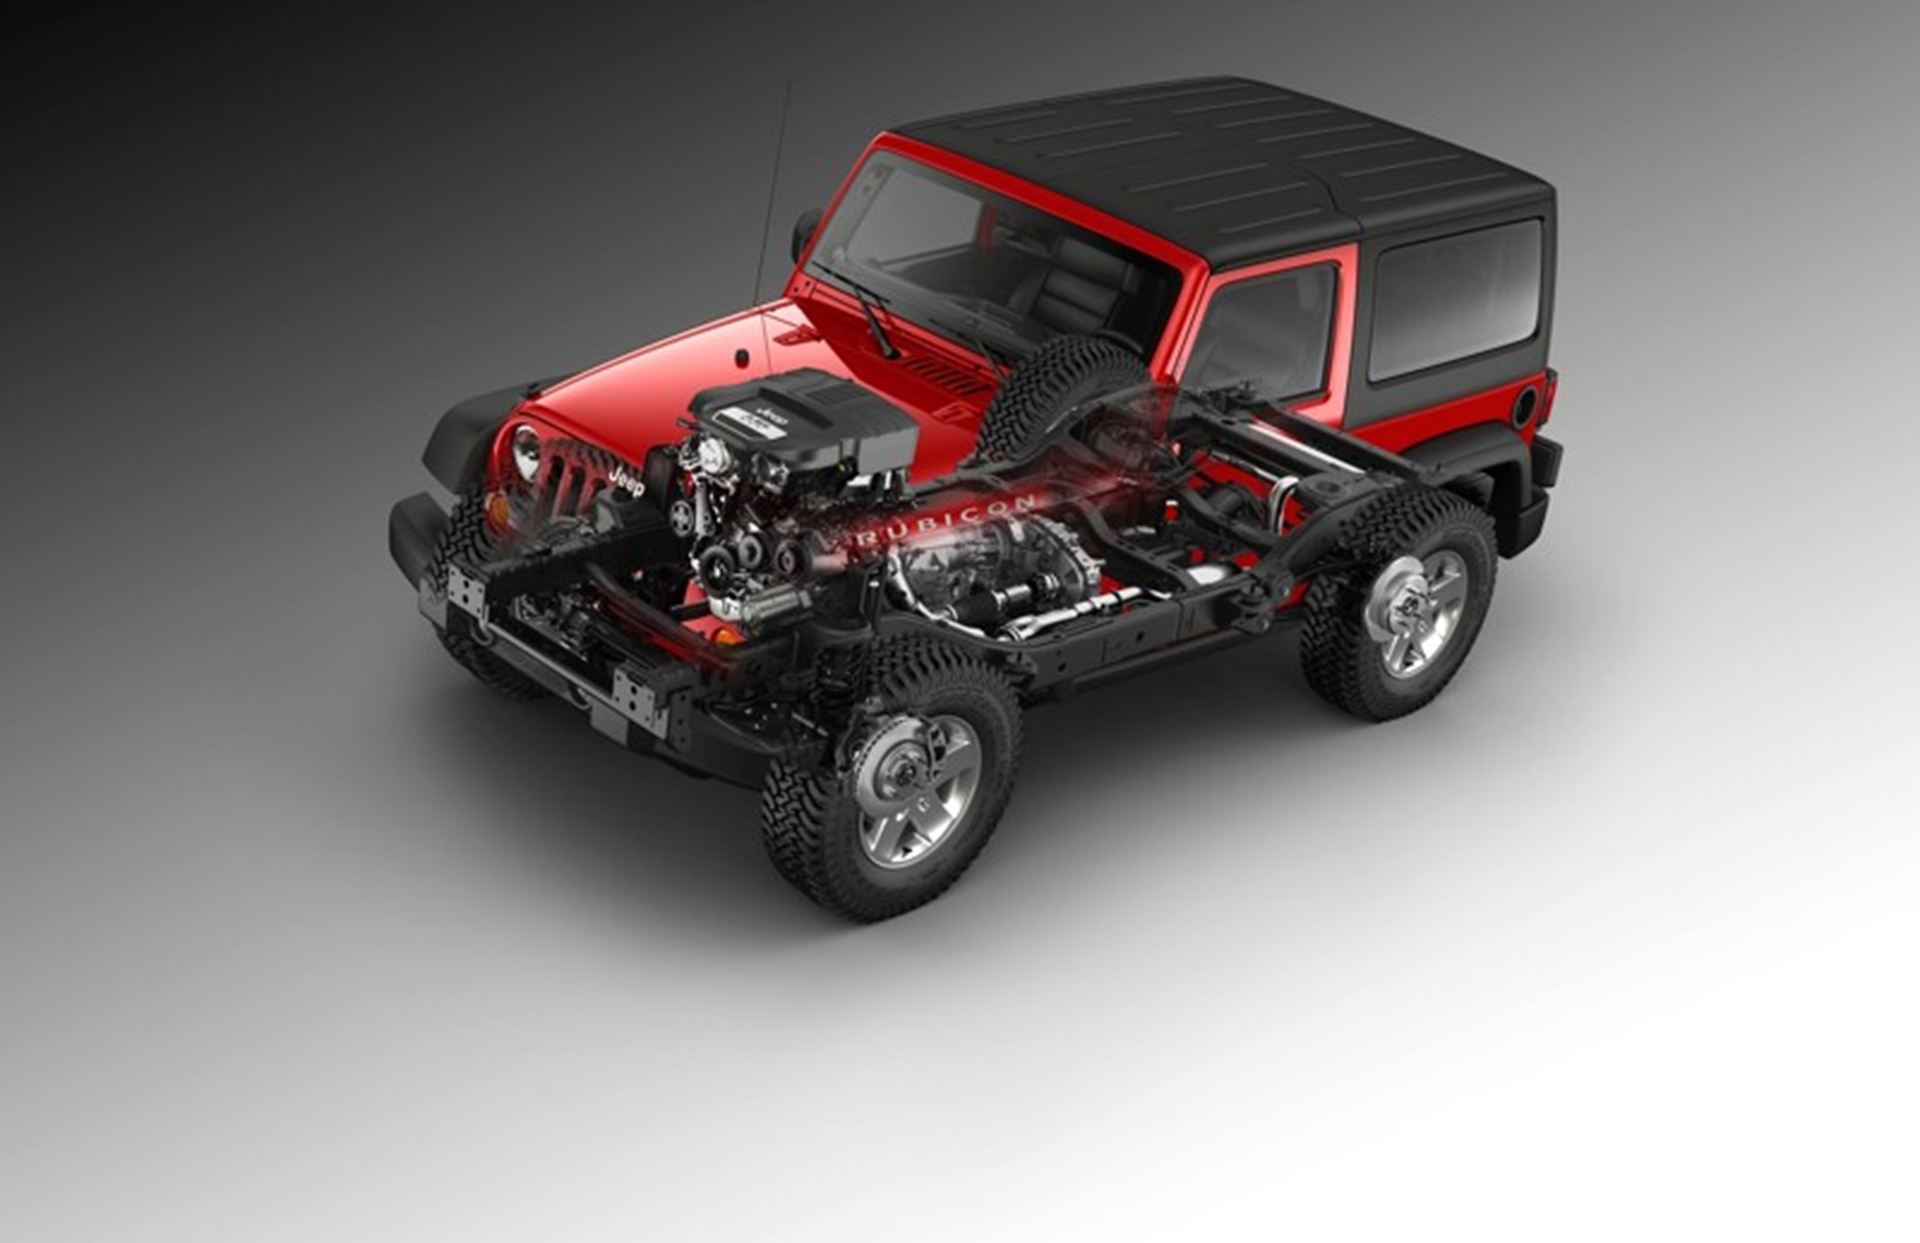 Camp Jeep® Debuts at the Portland International Auto Show